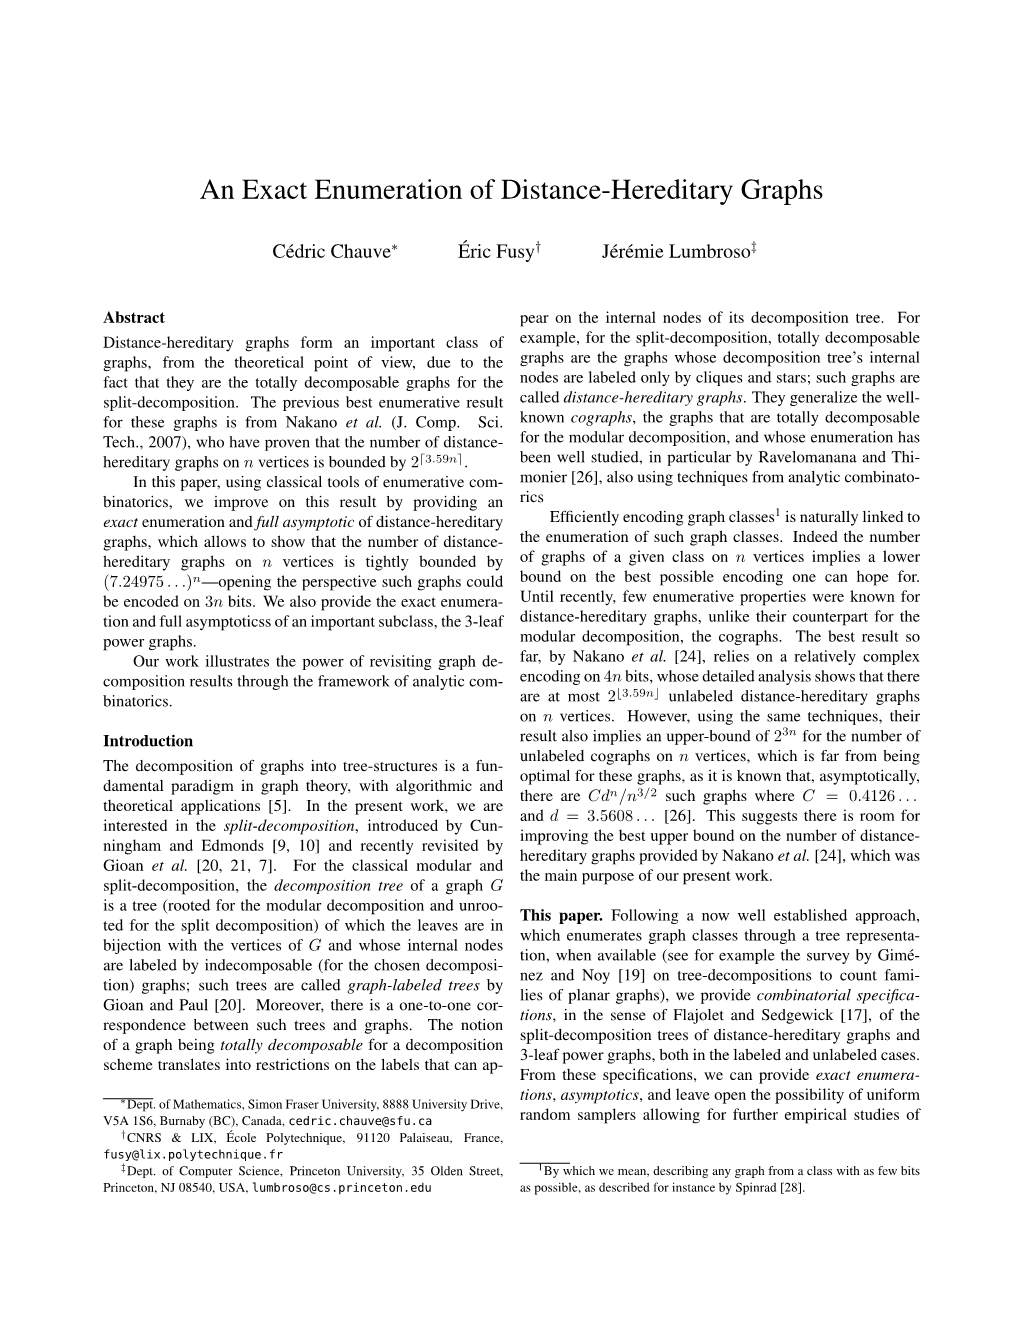 An Exact Enumeration of Distance-Hereditary Graphs